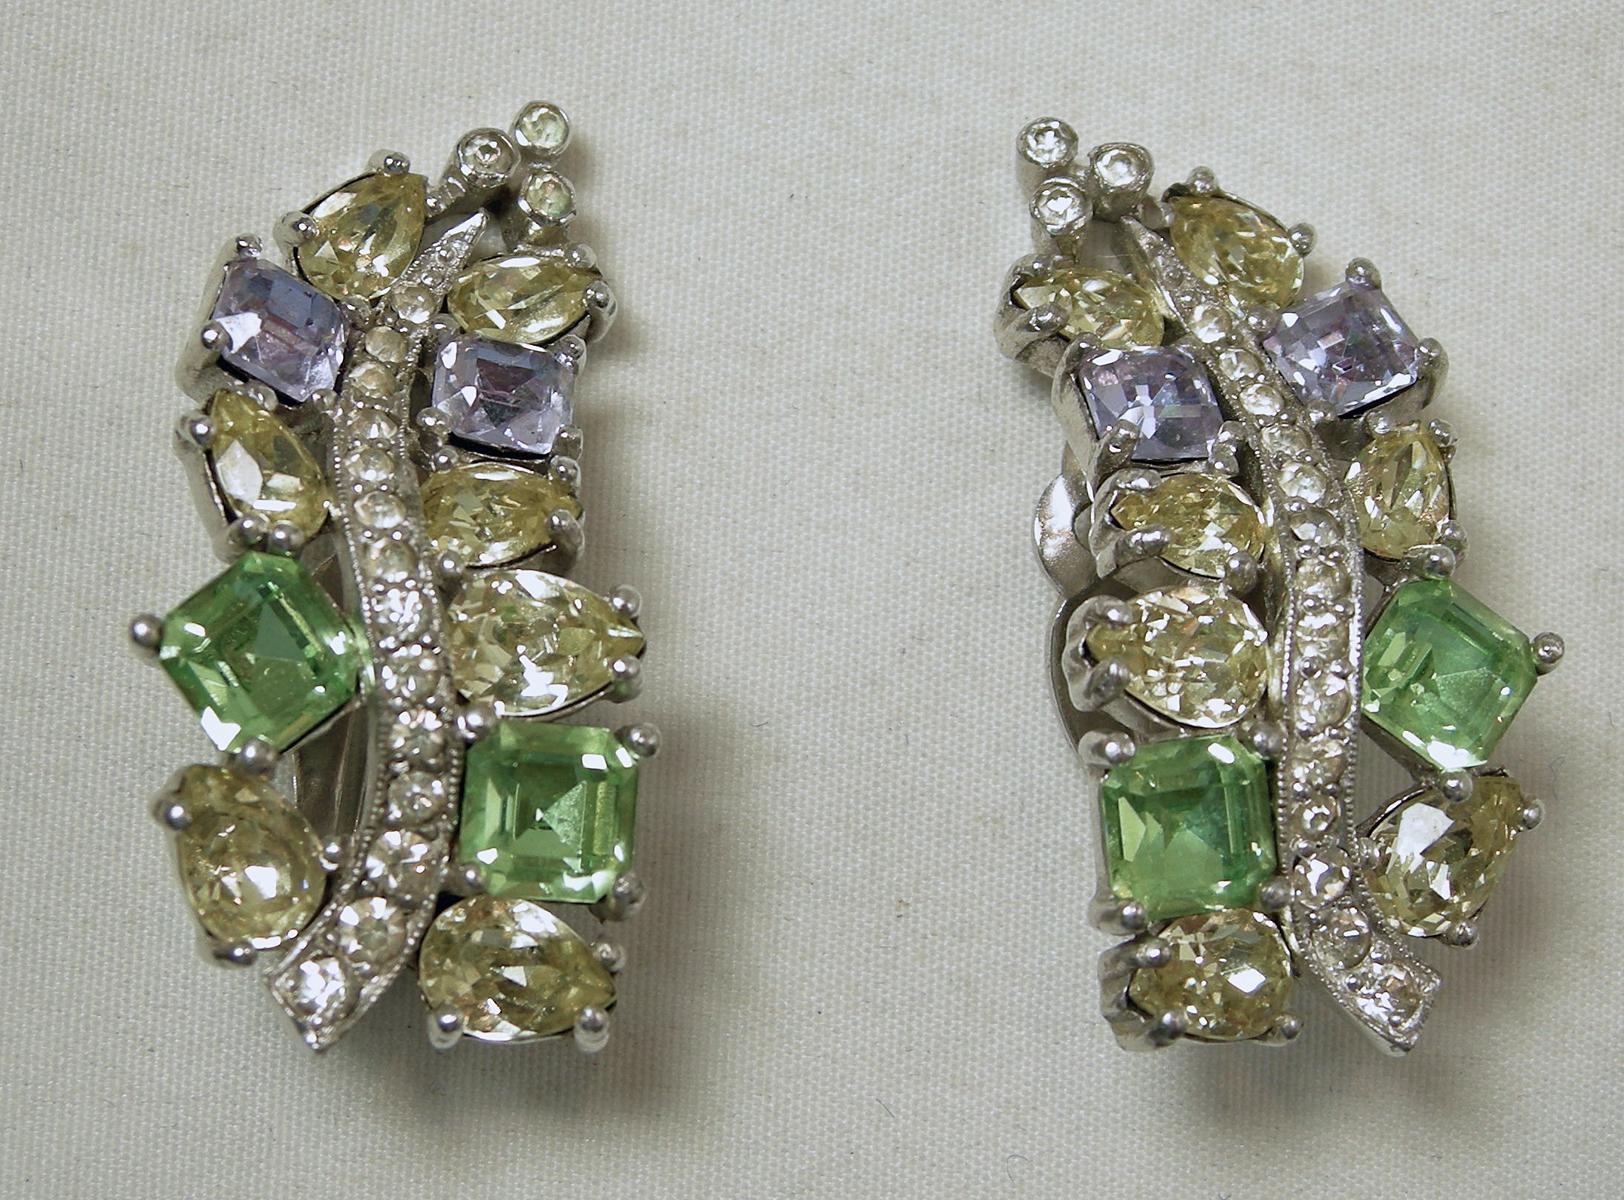 These vintage signed Jomaz earrings feature peridot green, citrine, blue and clear crystals in a rhodium silver tone setting.  In excellent condition, these clip earrings measure 1-3/8” x ¾” and are signed “Jomaz”.